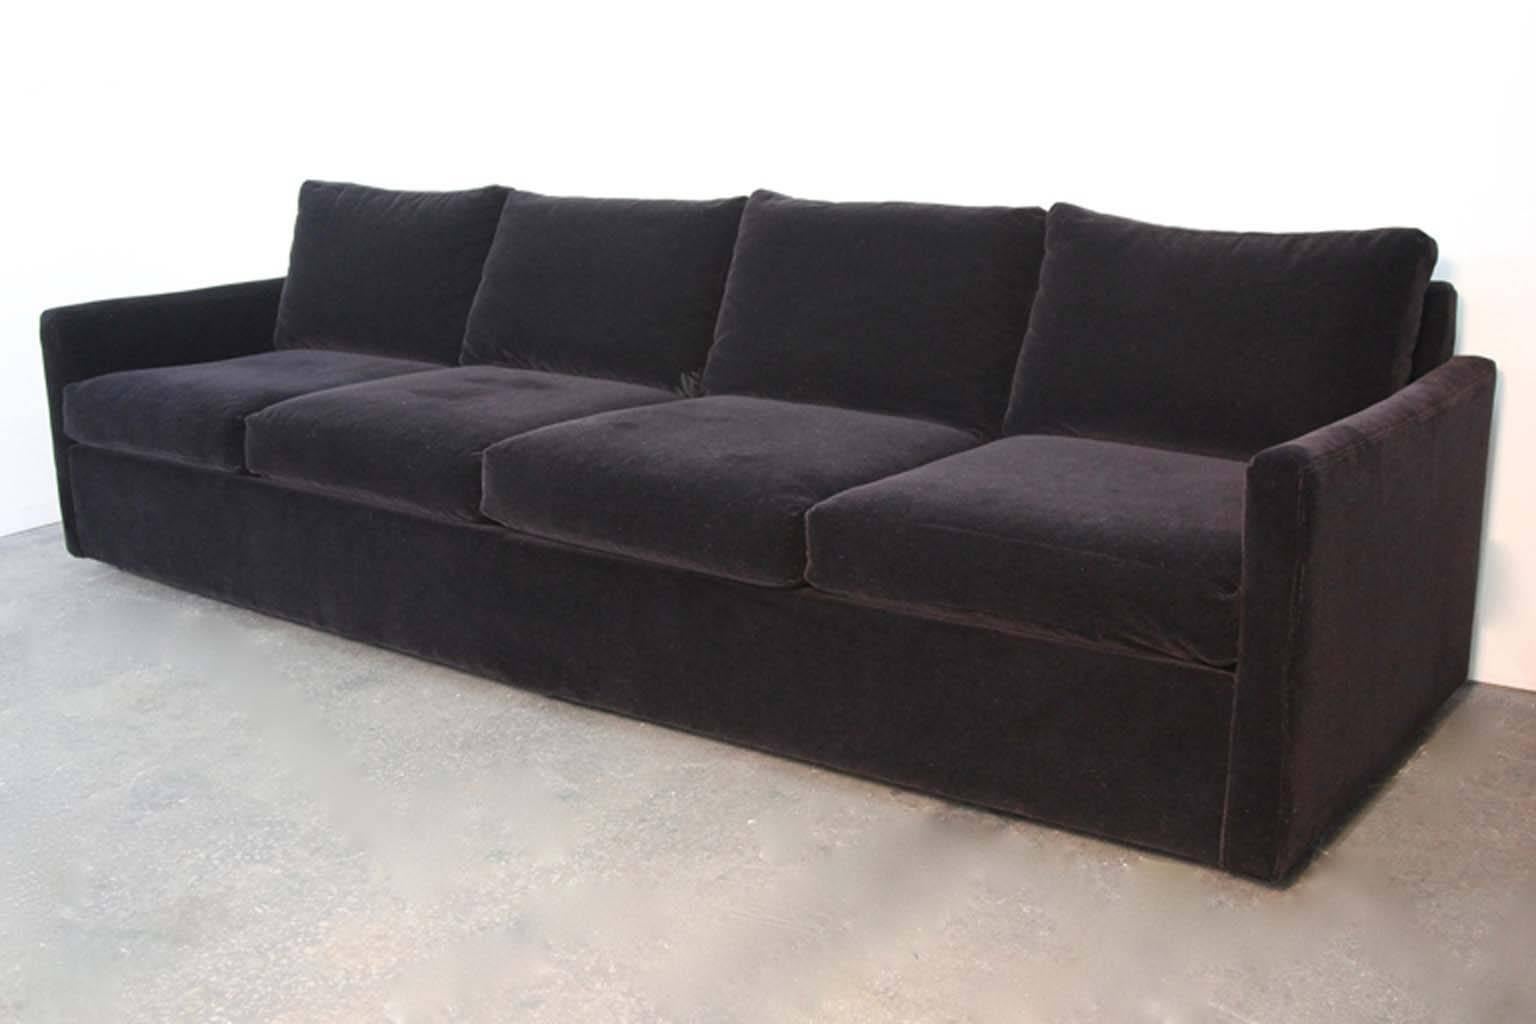 Mid-20th Century Mid-Century Modern Tuxedo Style Four-Seat Sofa in Black Mohair For Sale